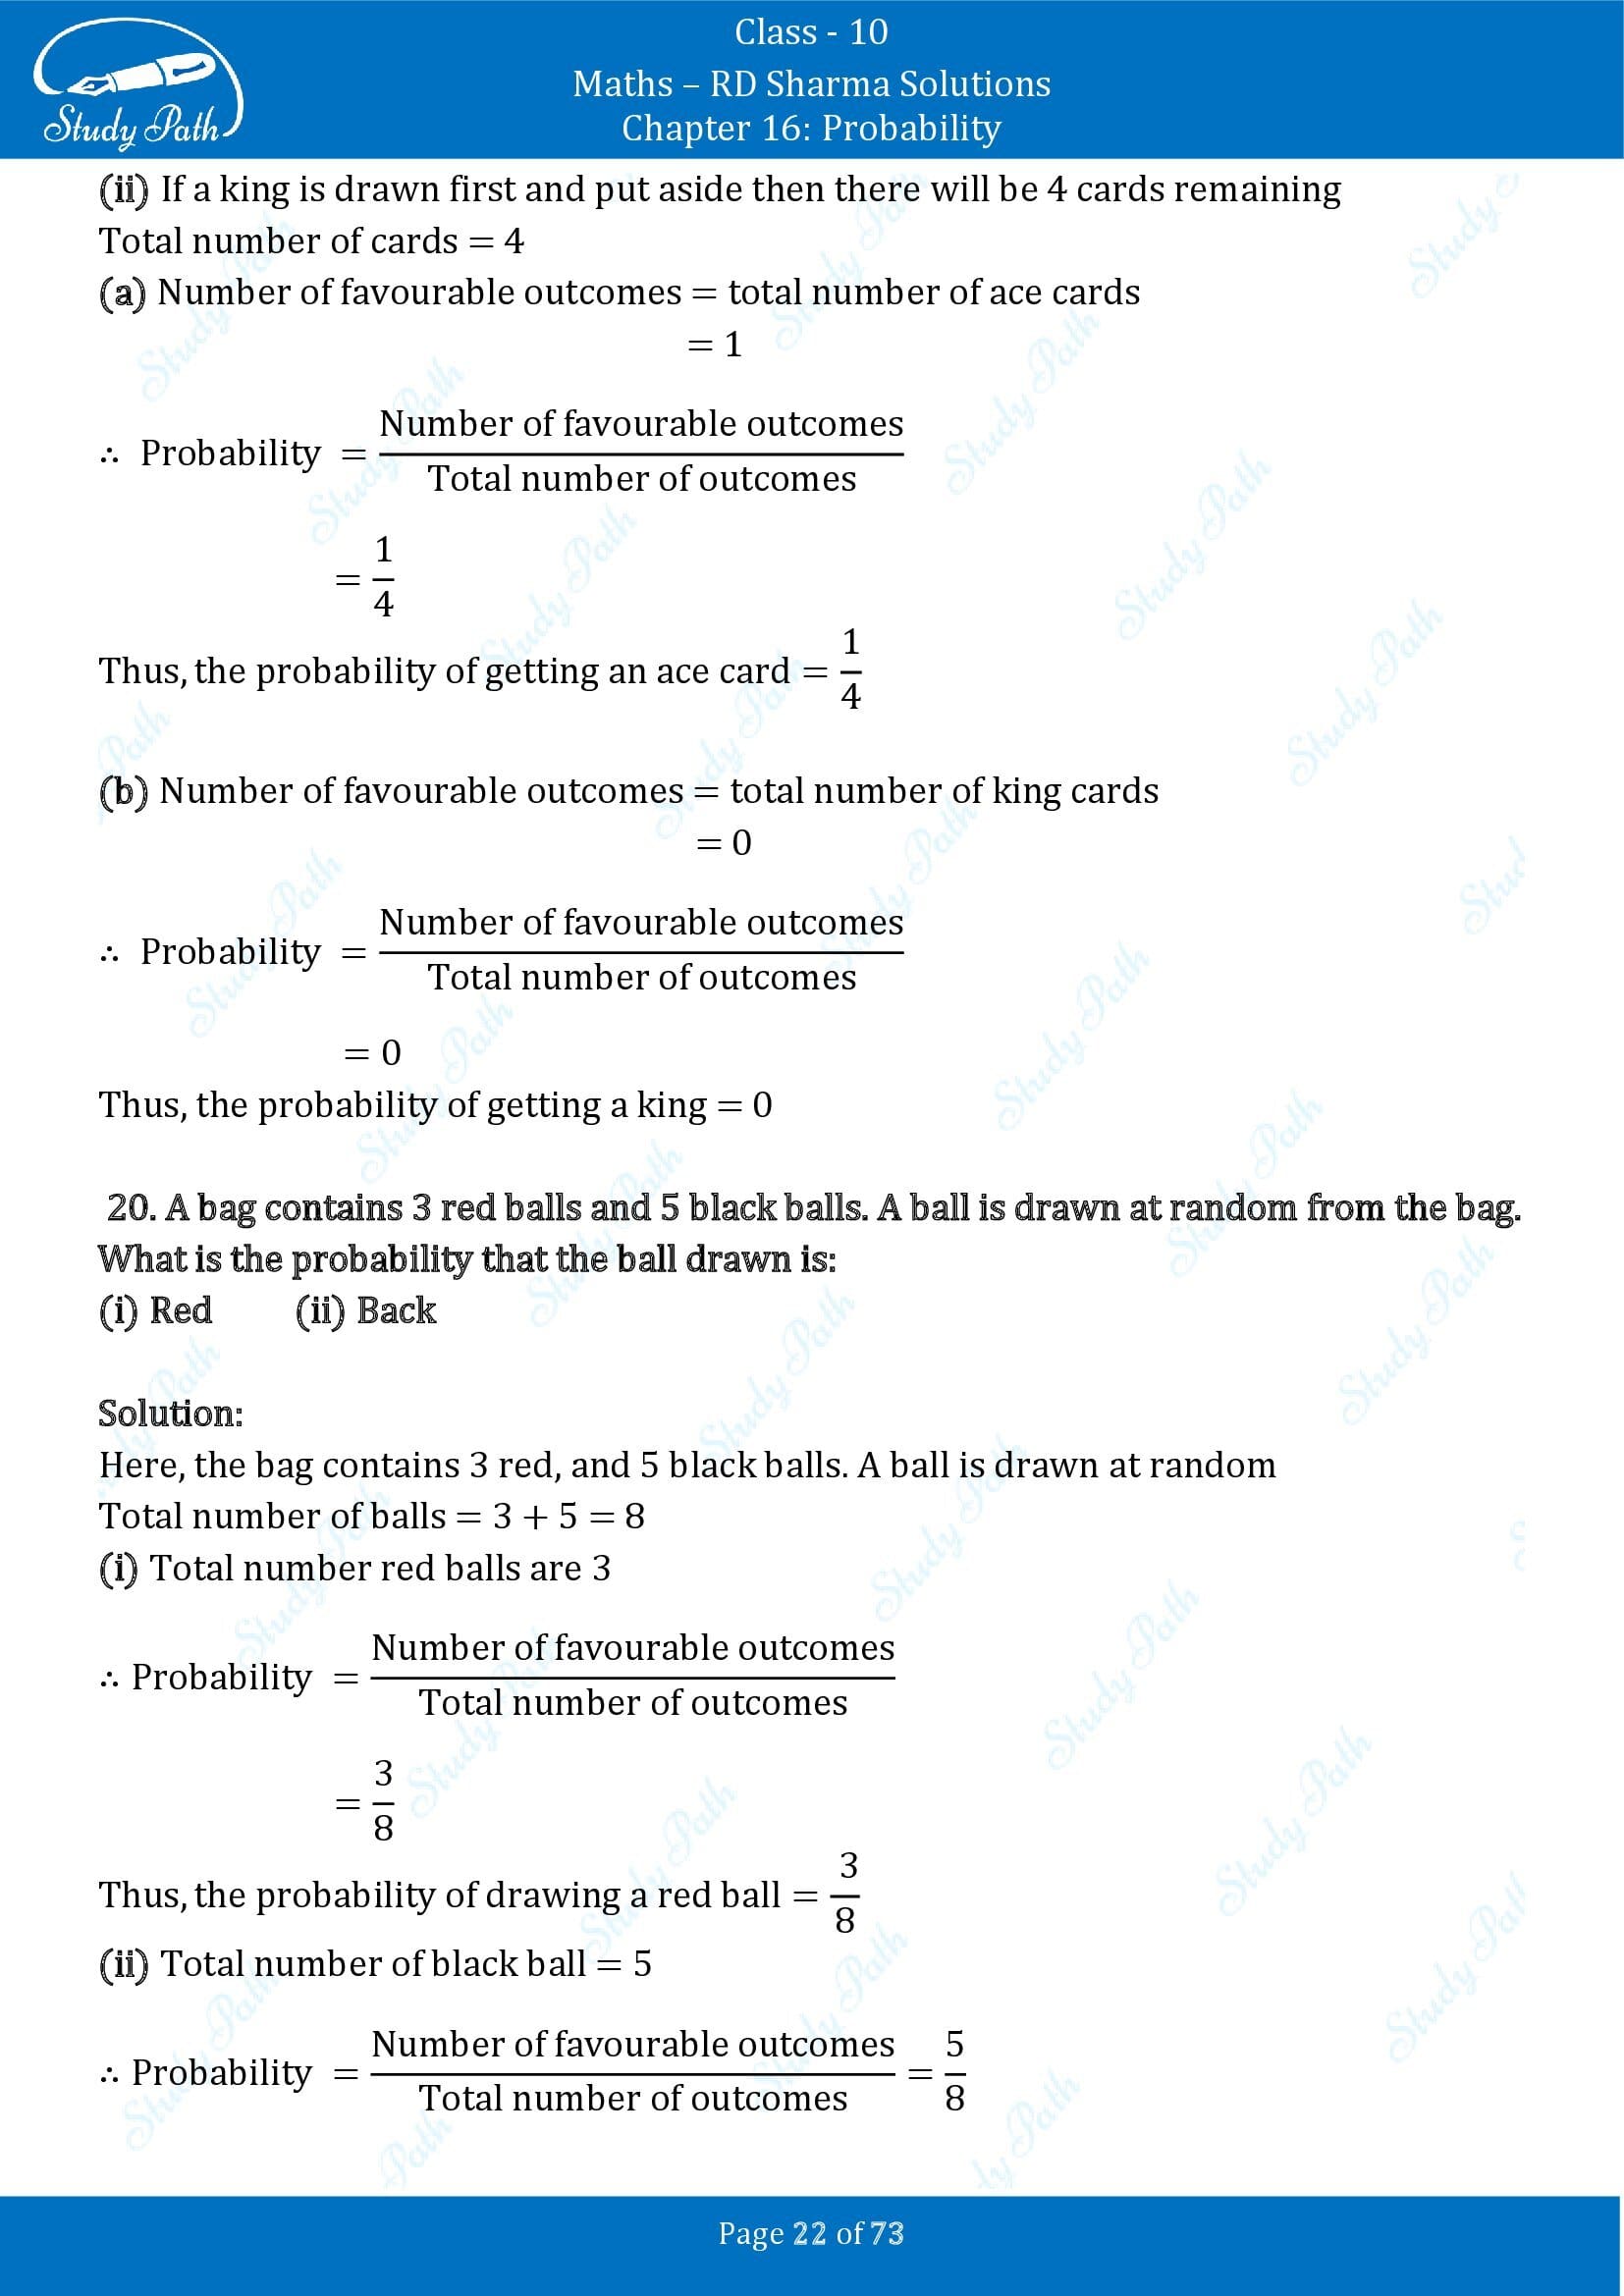 RD Sharma Solutions Class 10 Chapter 16 Probability Exercise 16.1 00022